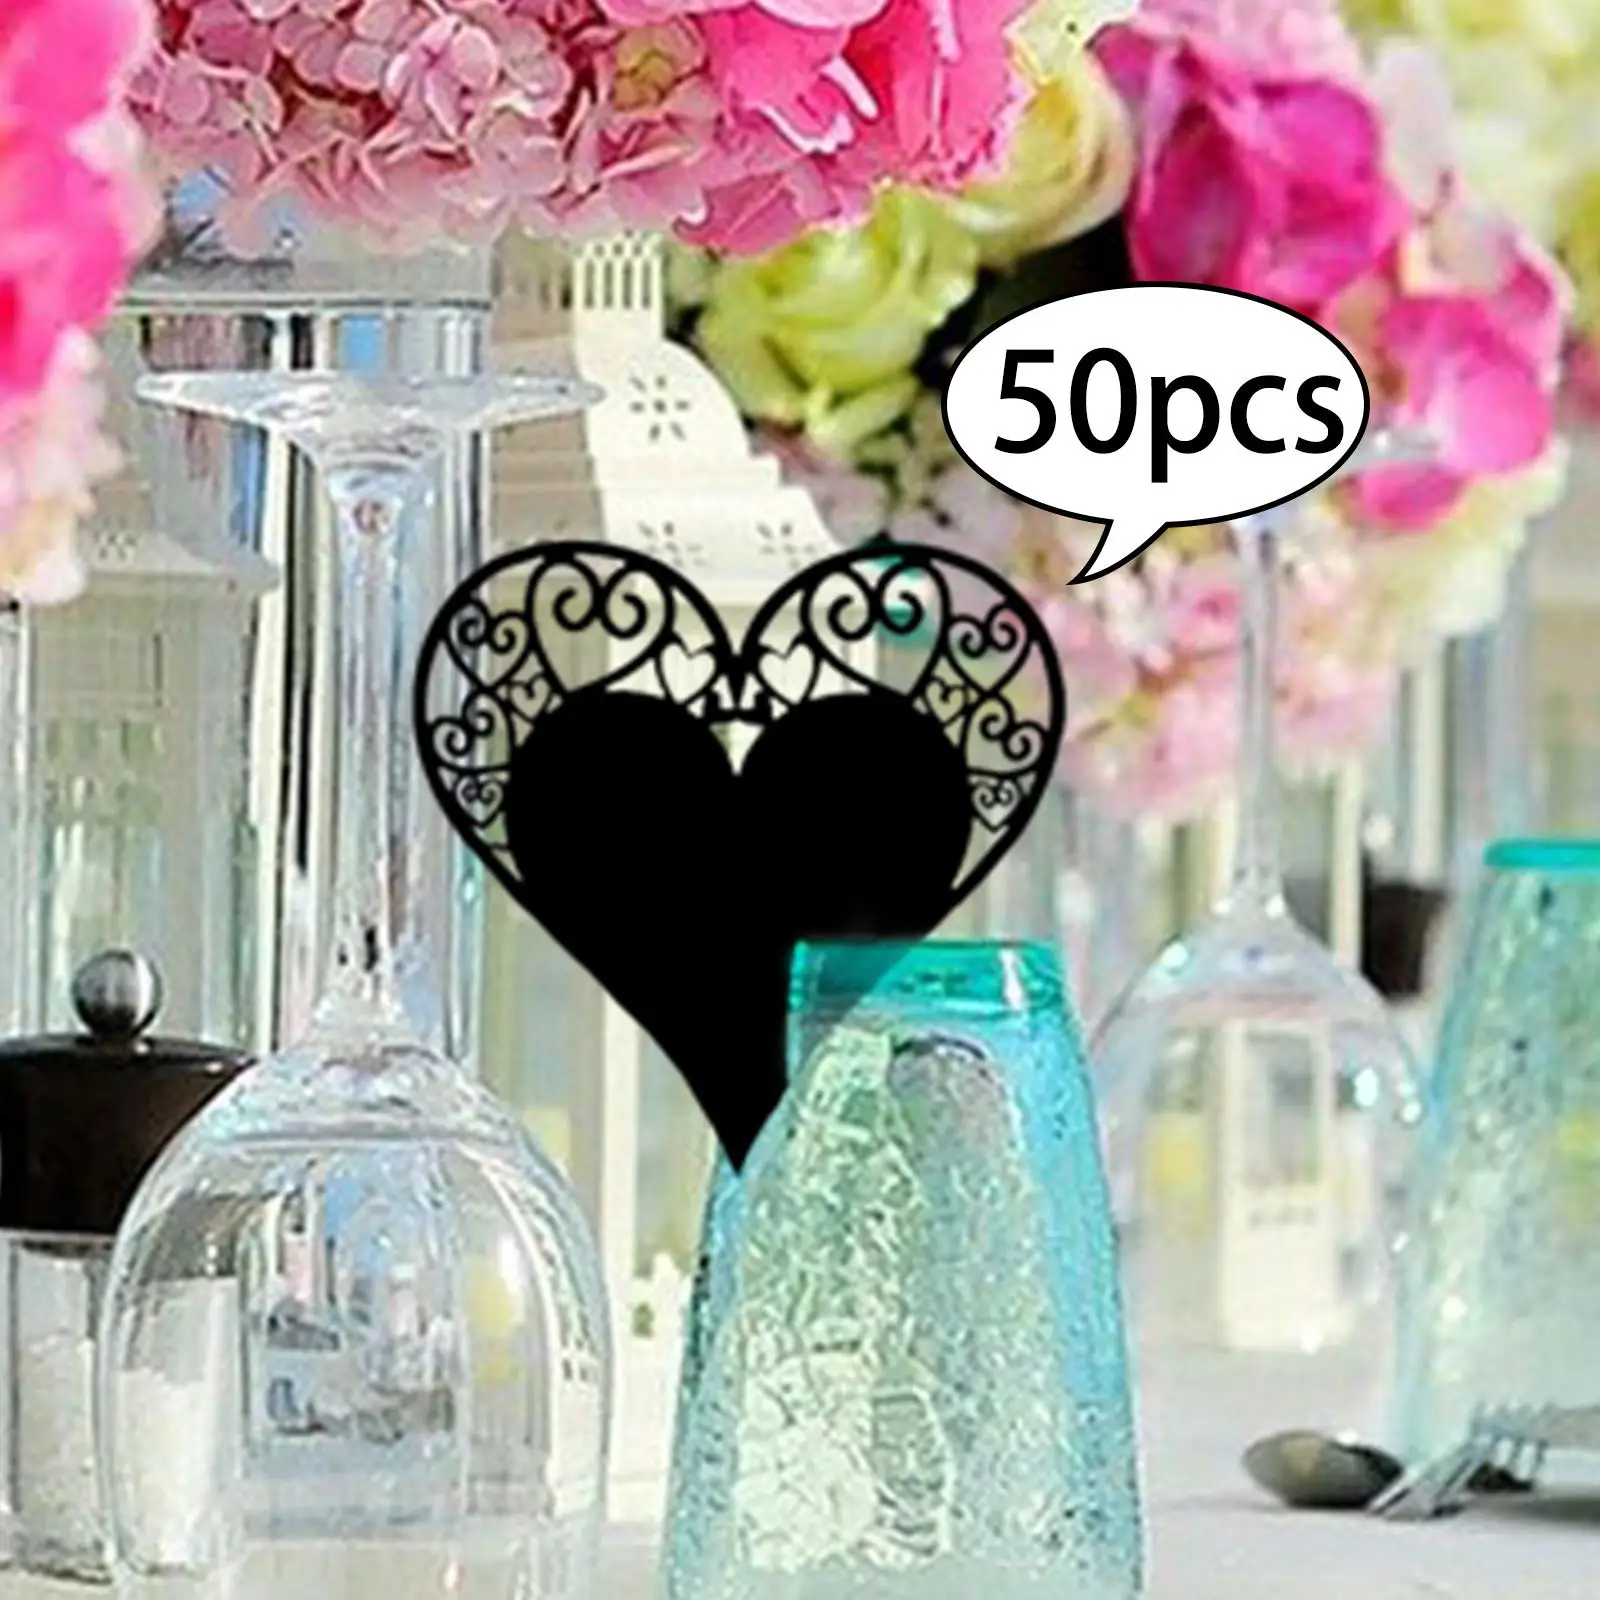 50 Pieces Heart Shape Paper Place Cards Wine Glass Card Elegant Mark Card for Reception Events Banquet Restaurant Decoration